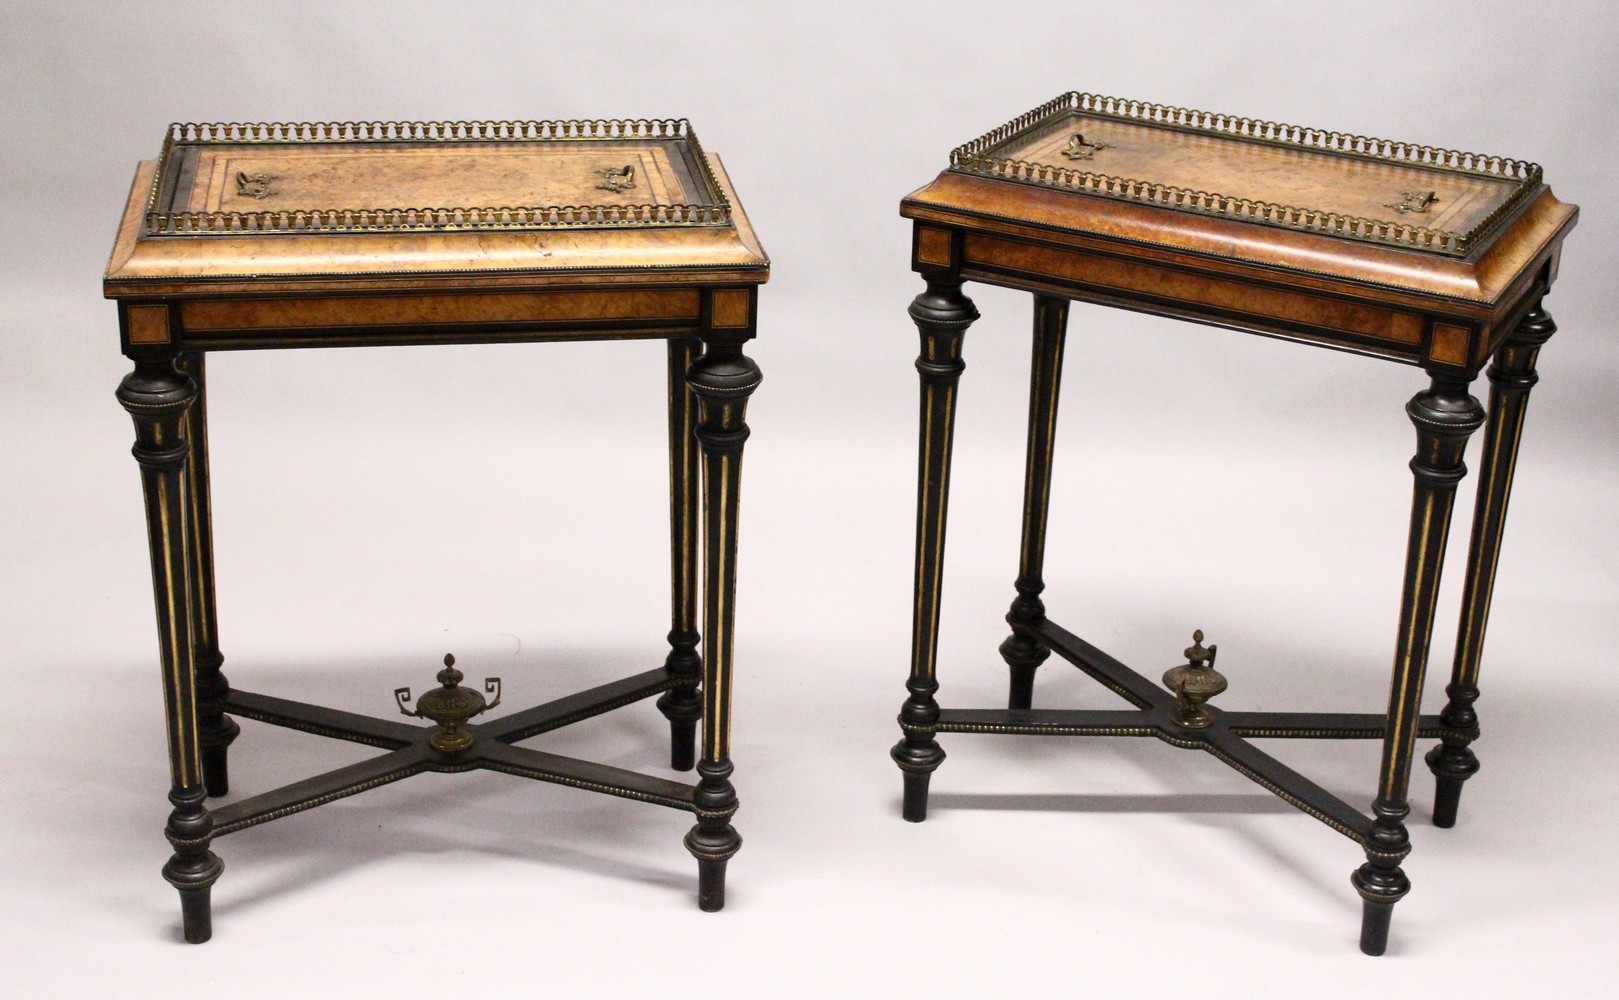 A PAIR OF 19TH CENTURY FRENCH WALNUT, EBONISED AND ORMOLU RECTANGULAR JARDINIERES, with removable